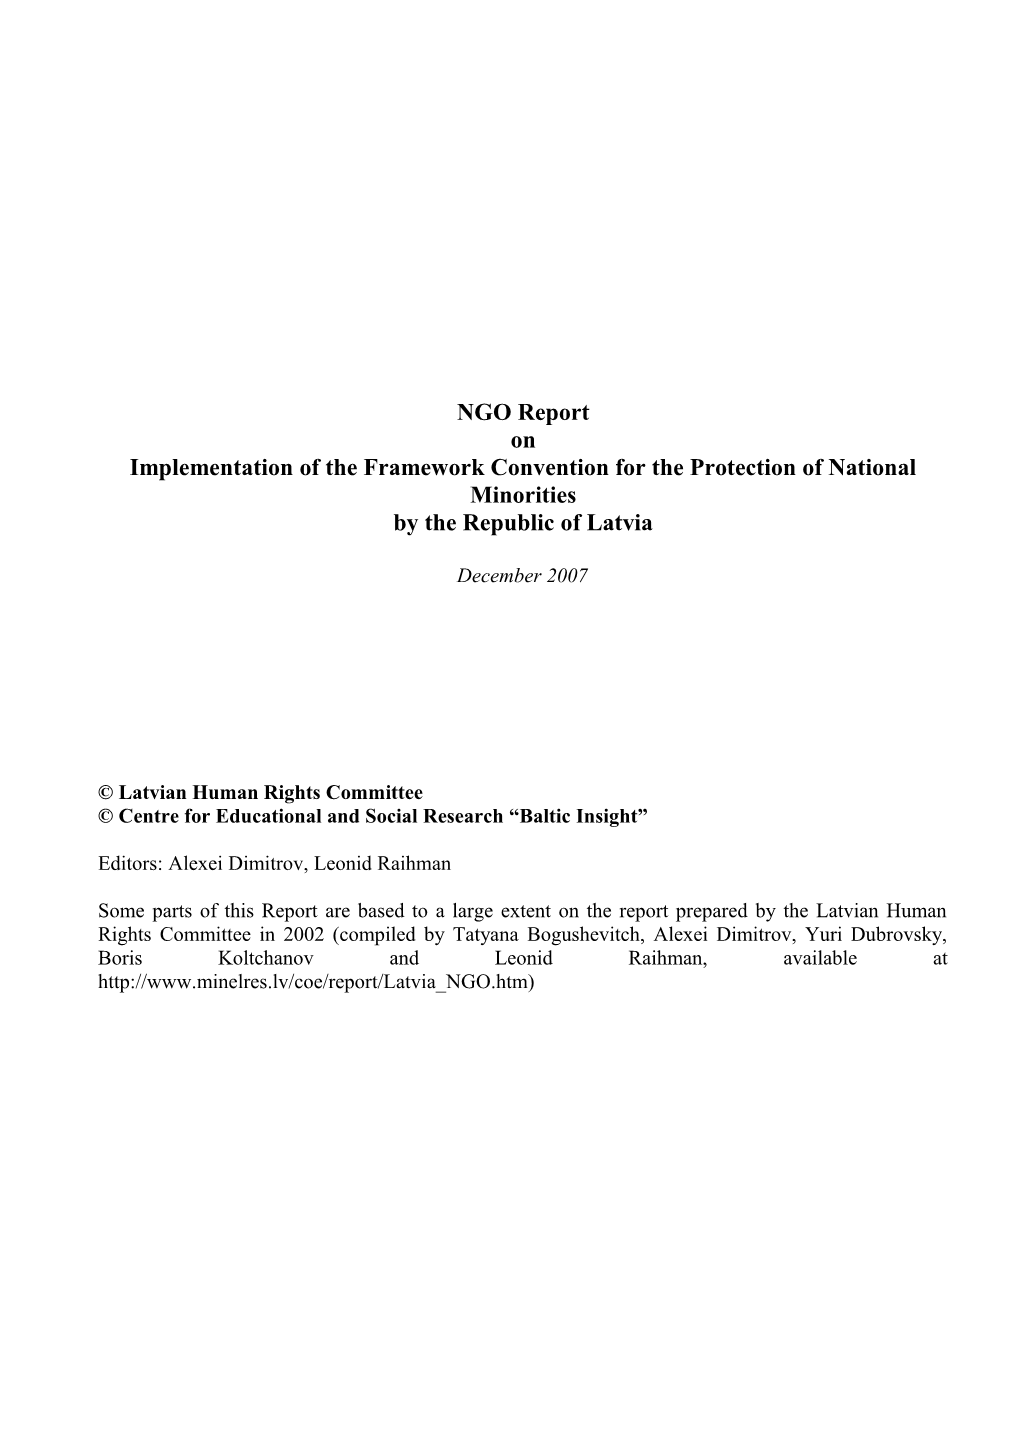 Implementation of the Framework Convention for the Protection of National Minorities